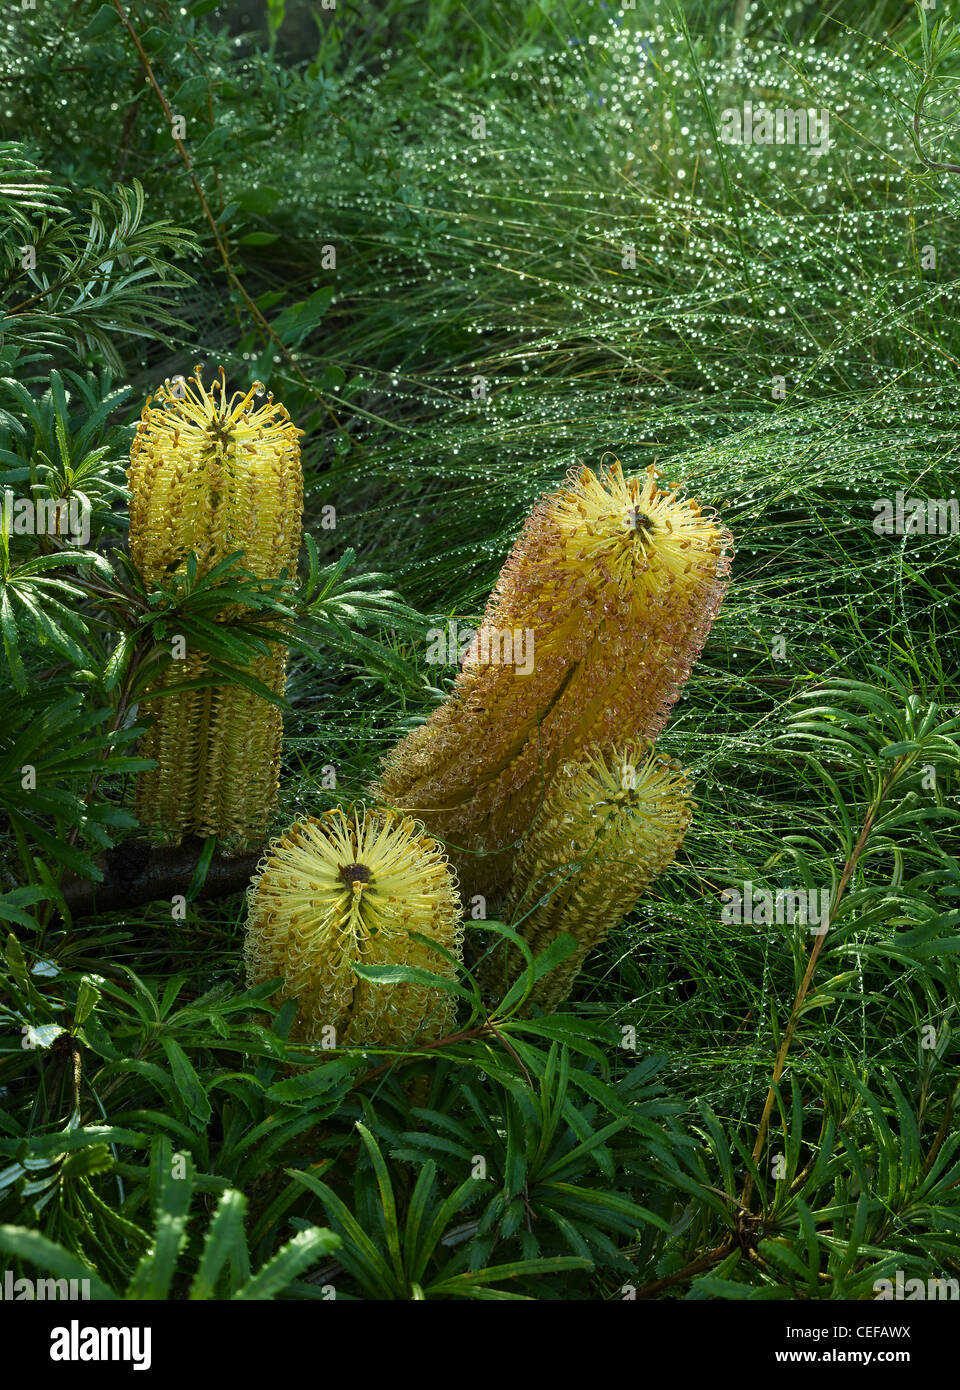 Banksia spinulosa in flower Stock Photo